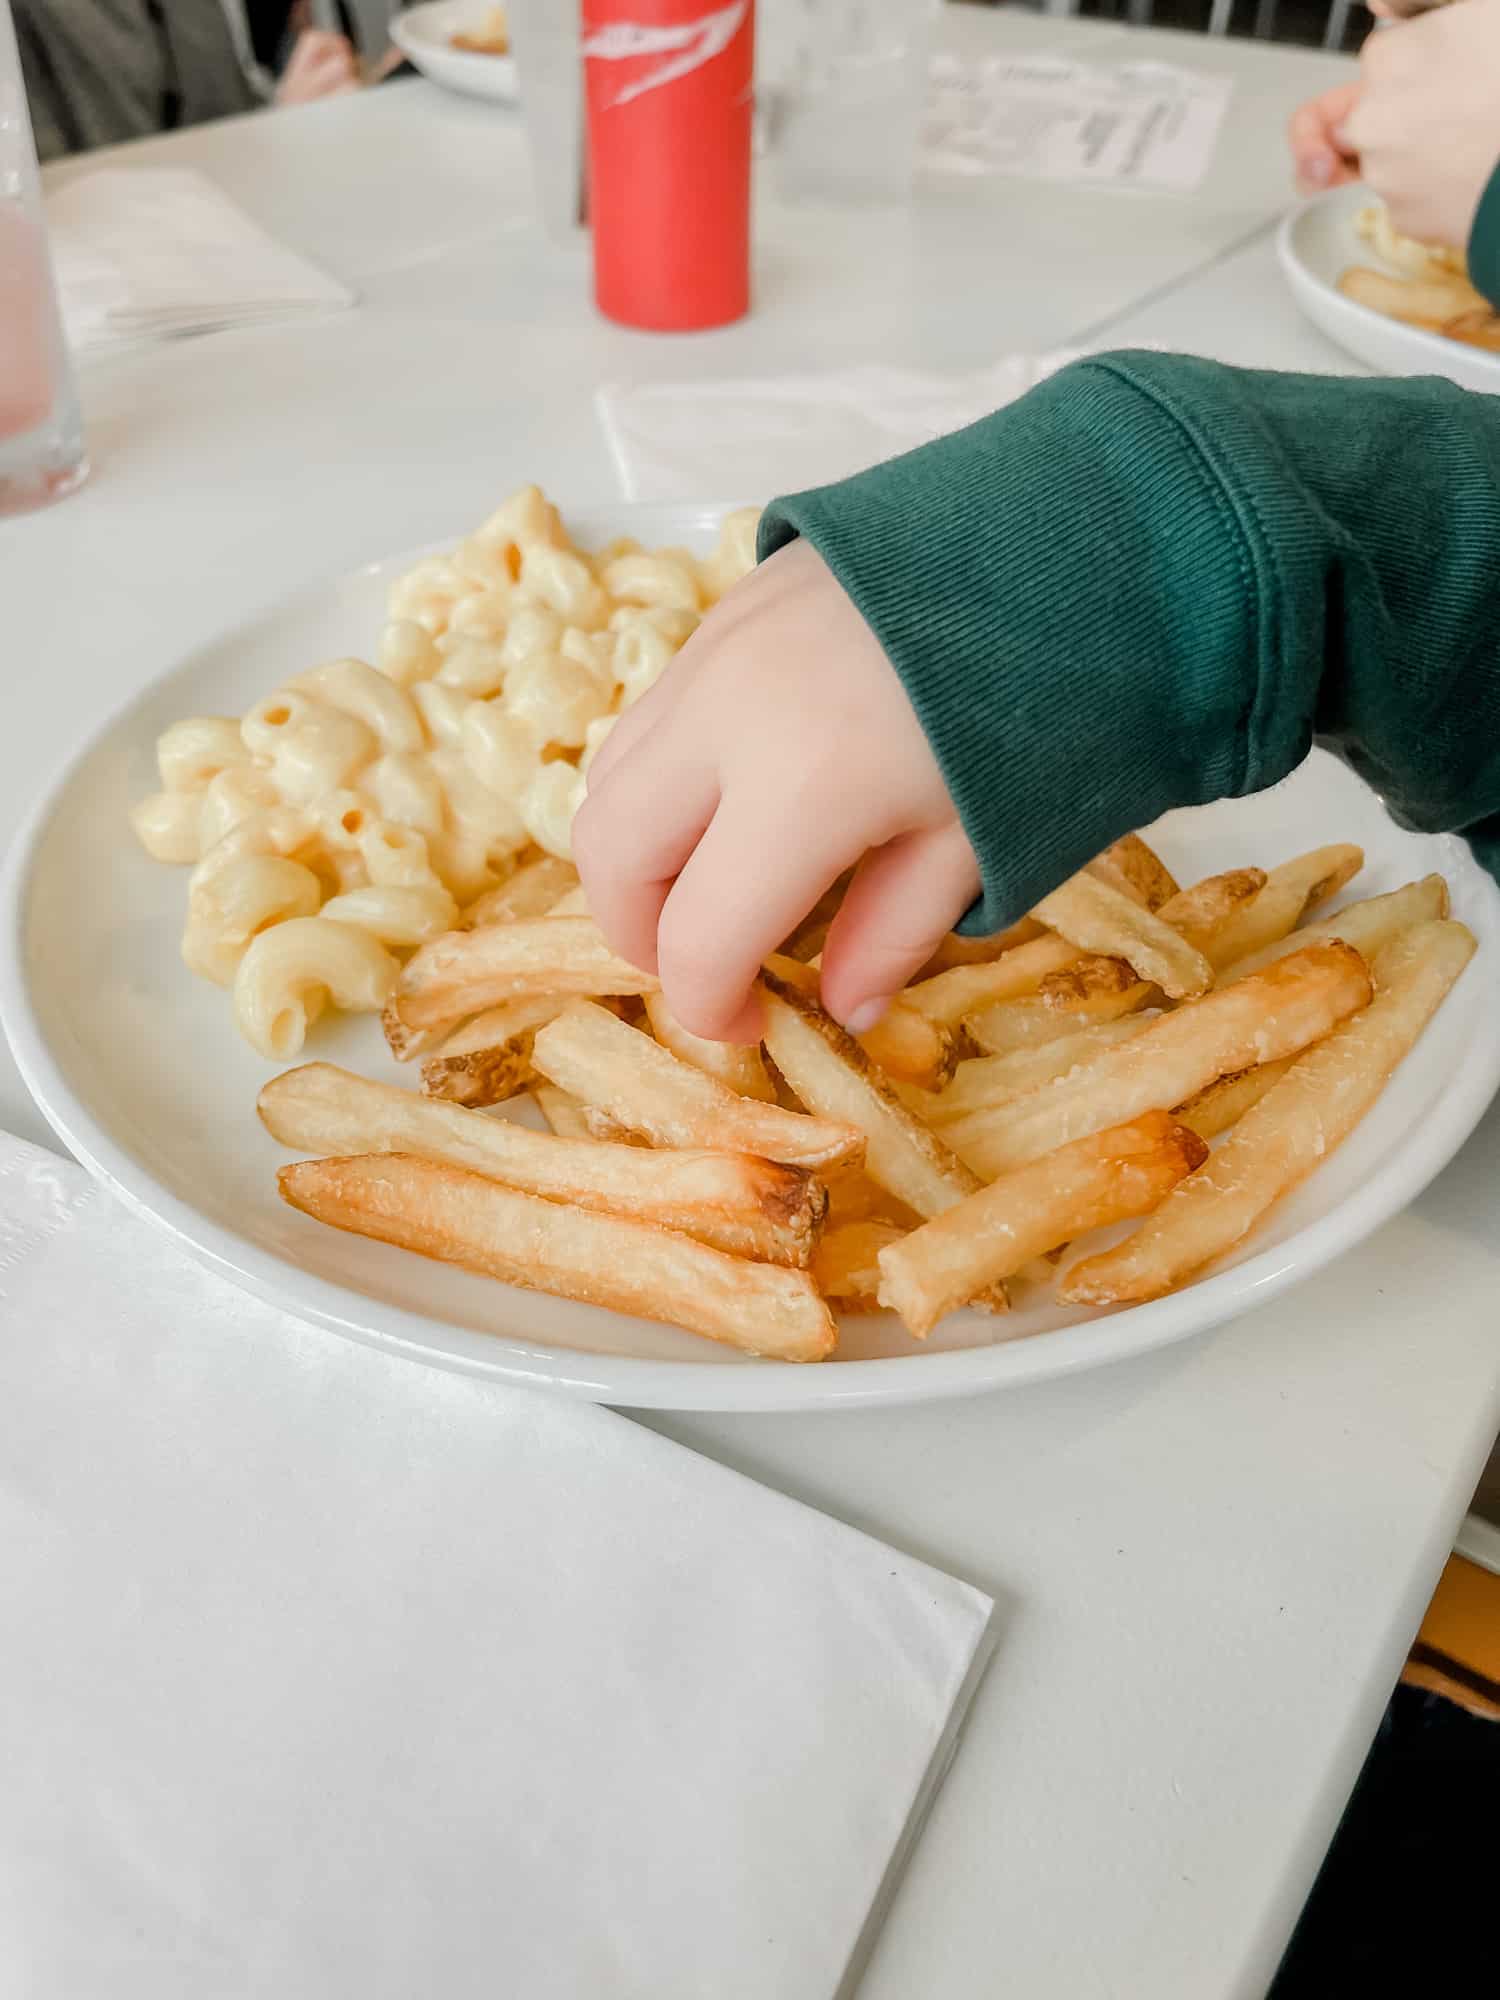 french fries and mac and cheese on a white plate with a little boy's fingers grabbing a fry 